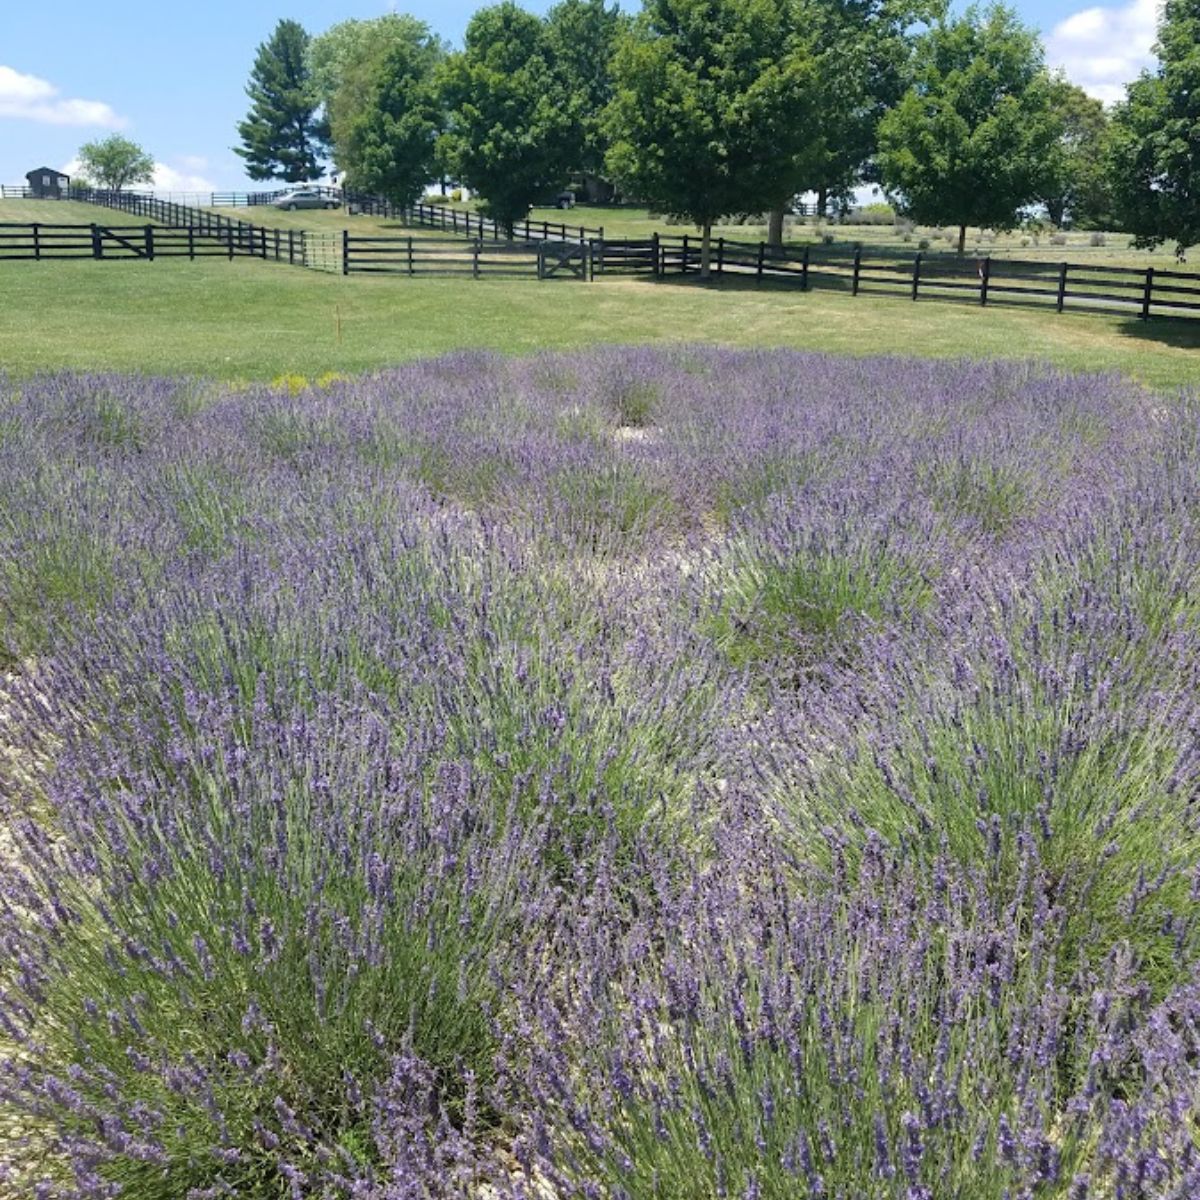 A field of lavender flowers with cattle fencing, trees and blue skies in the background.